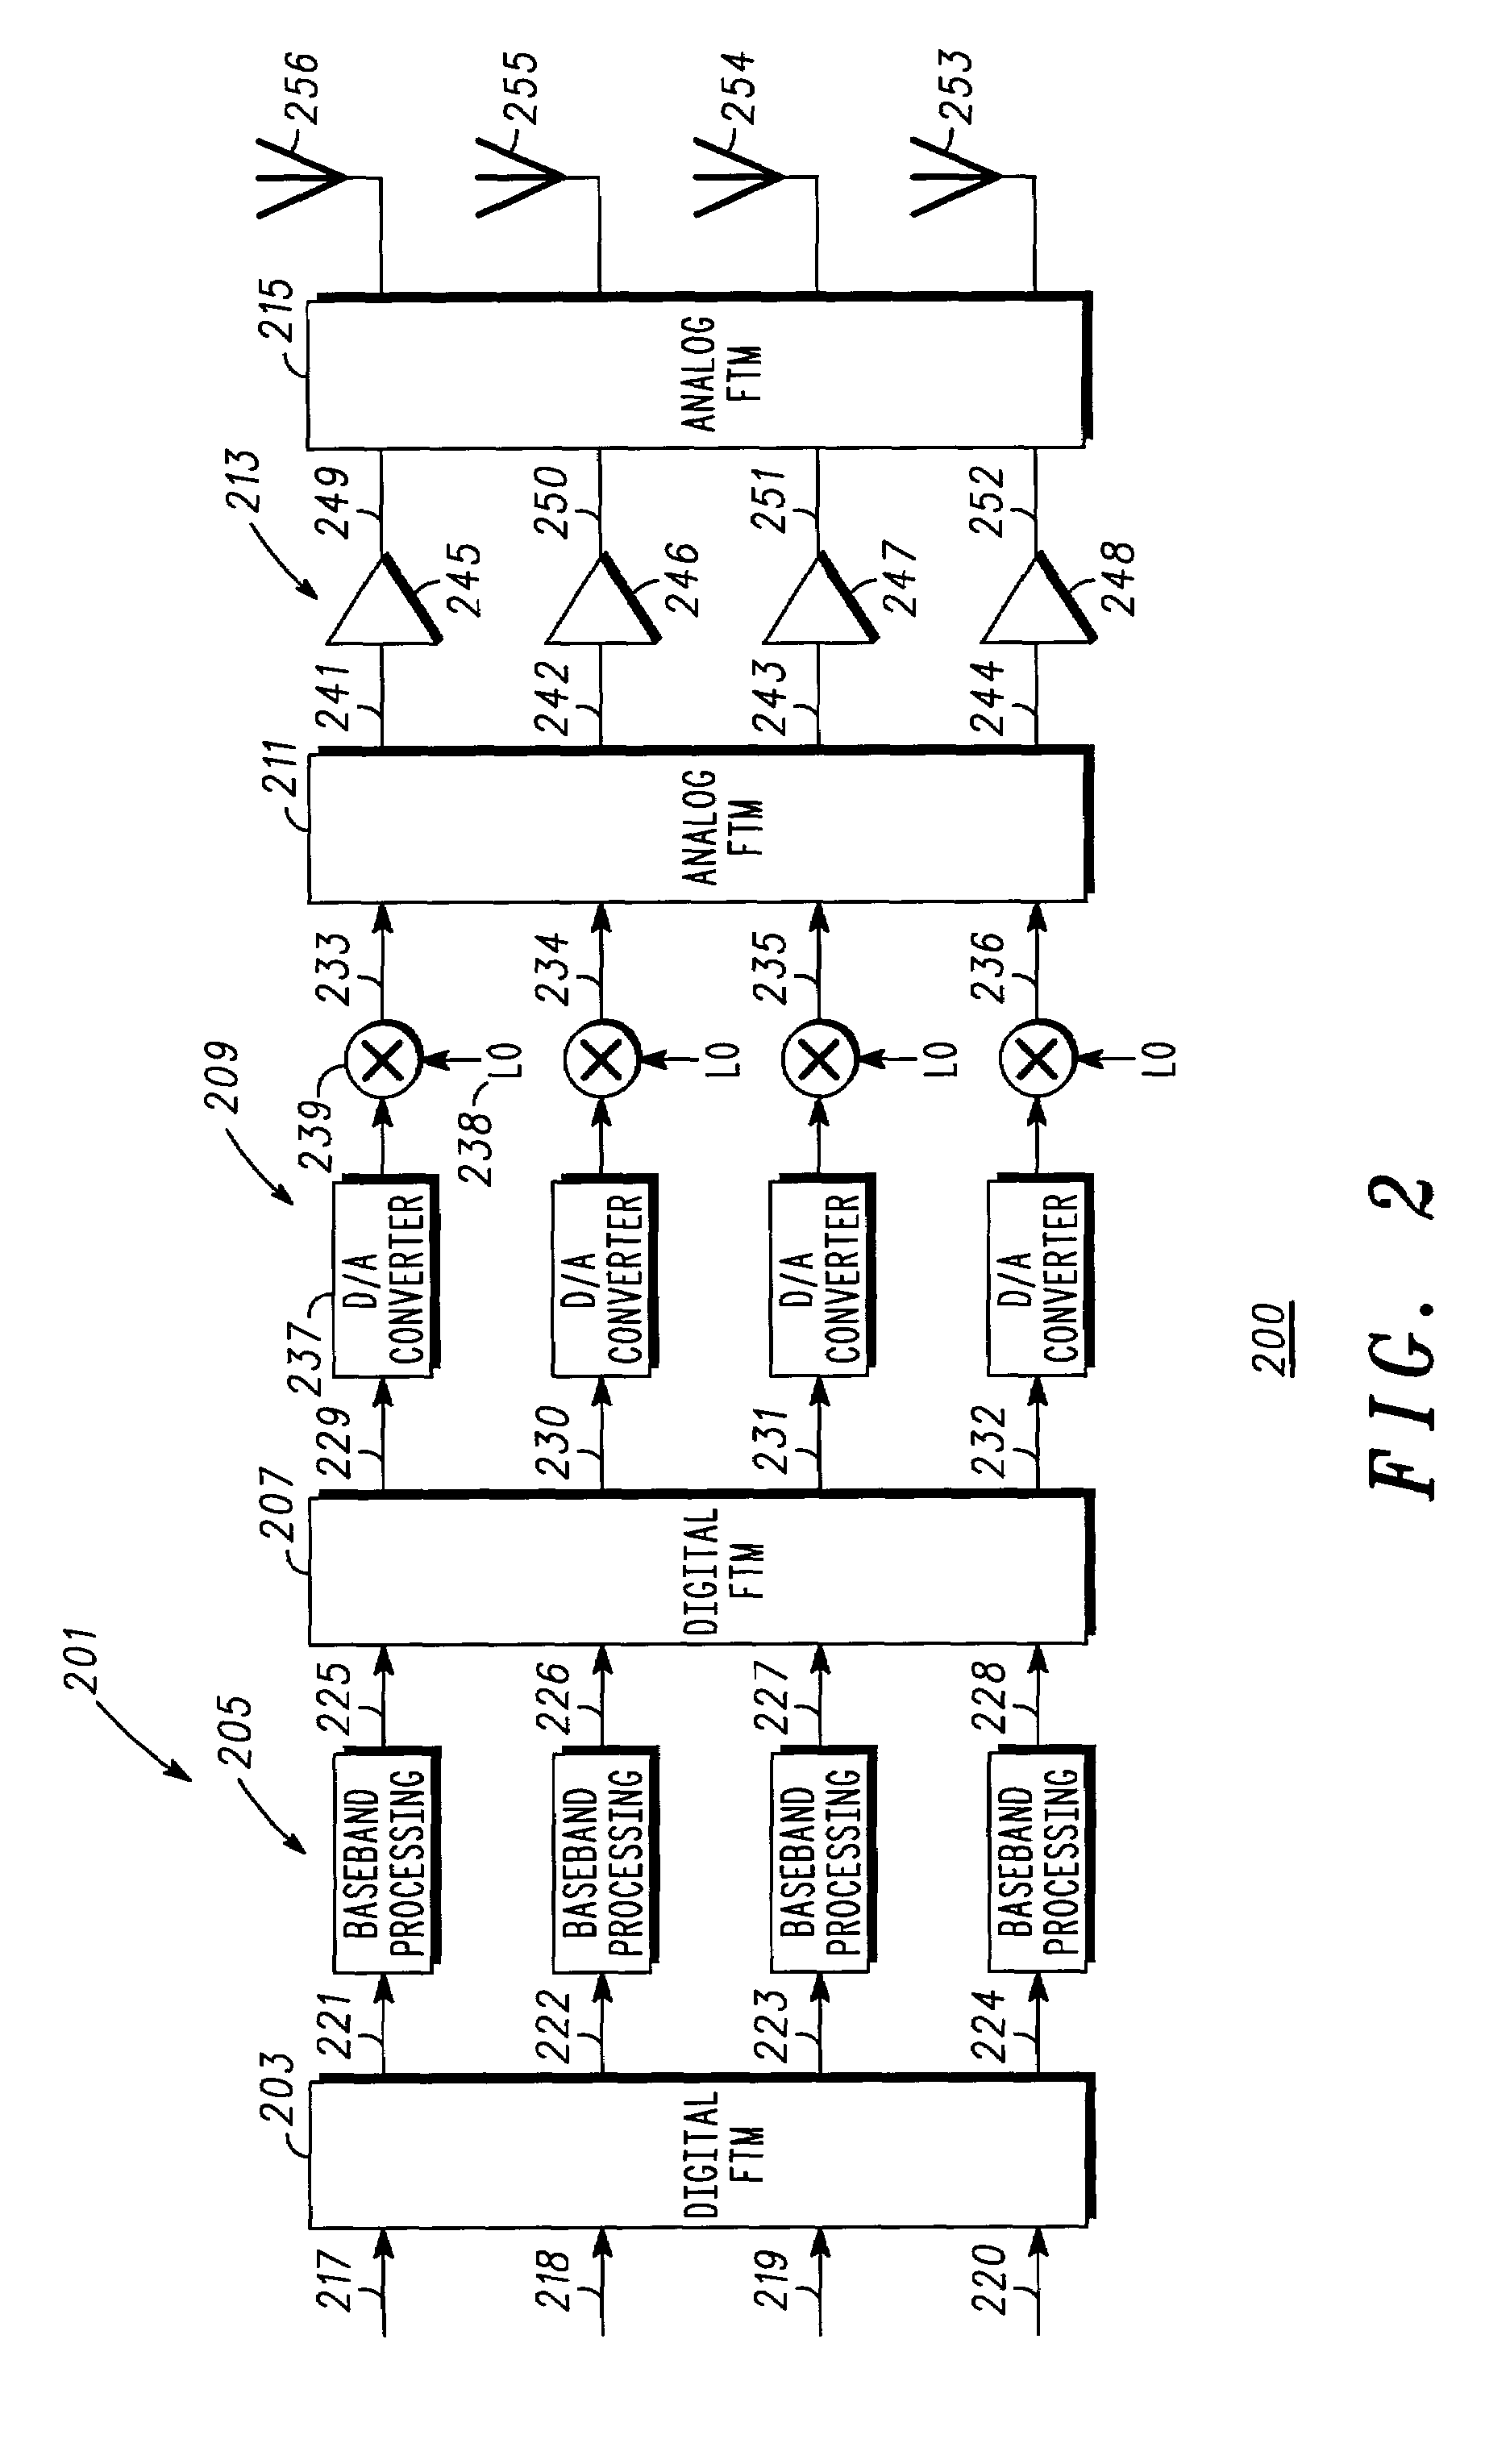 Method and apparatus for reducing transmitter peak power requirements using dual matrices